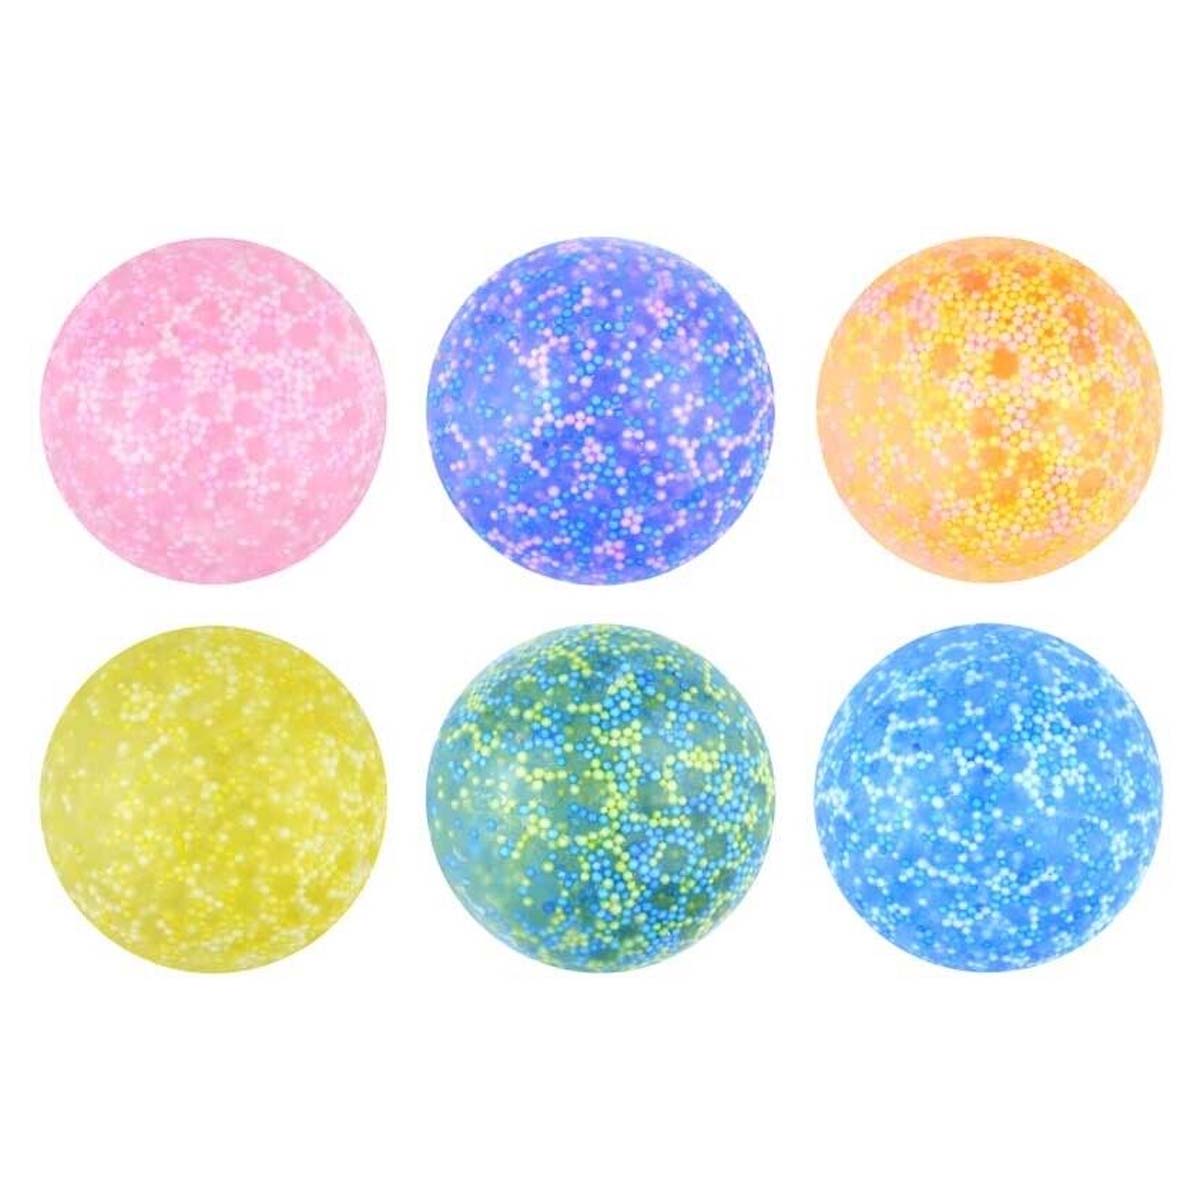 Squeeze Beadz - Squishy Squeeze Sensory 7cm Stress Balls with Beads - 1pcs - Continental Food Store